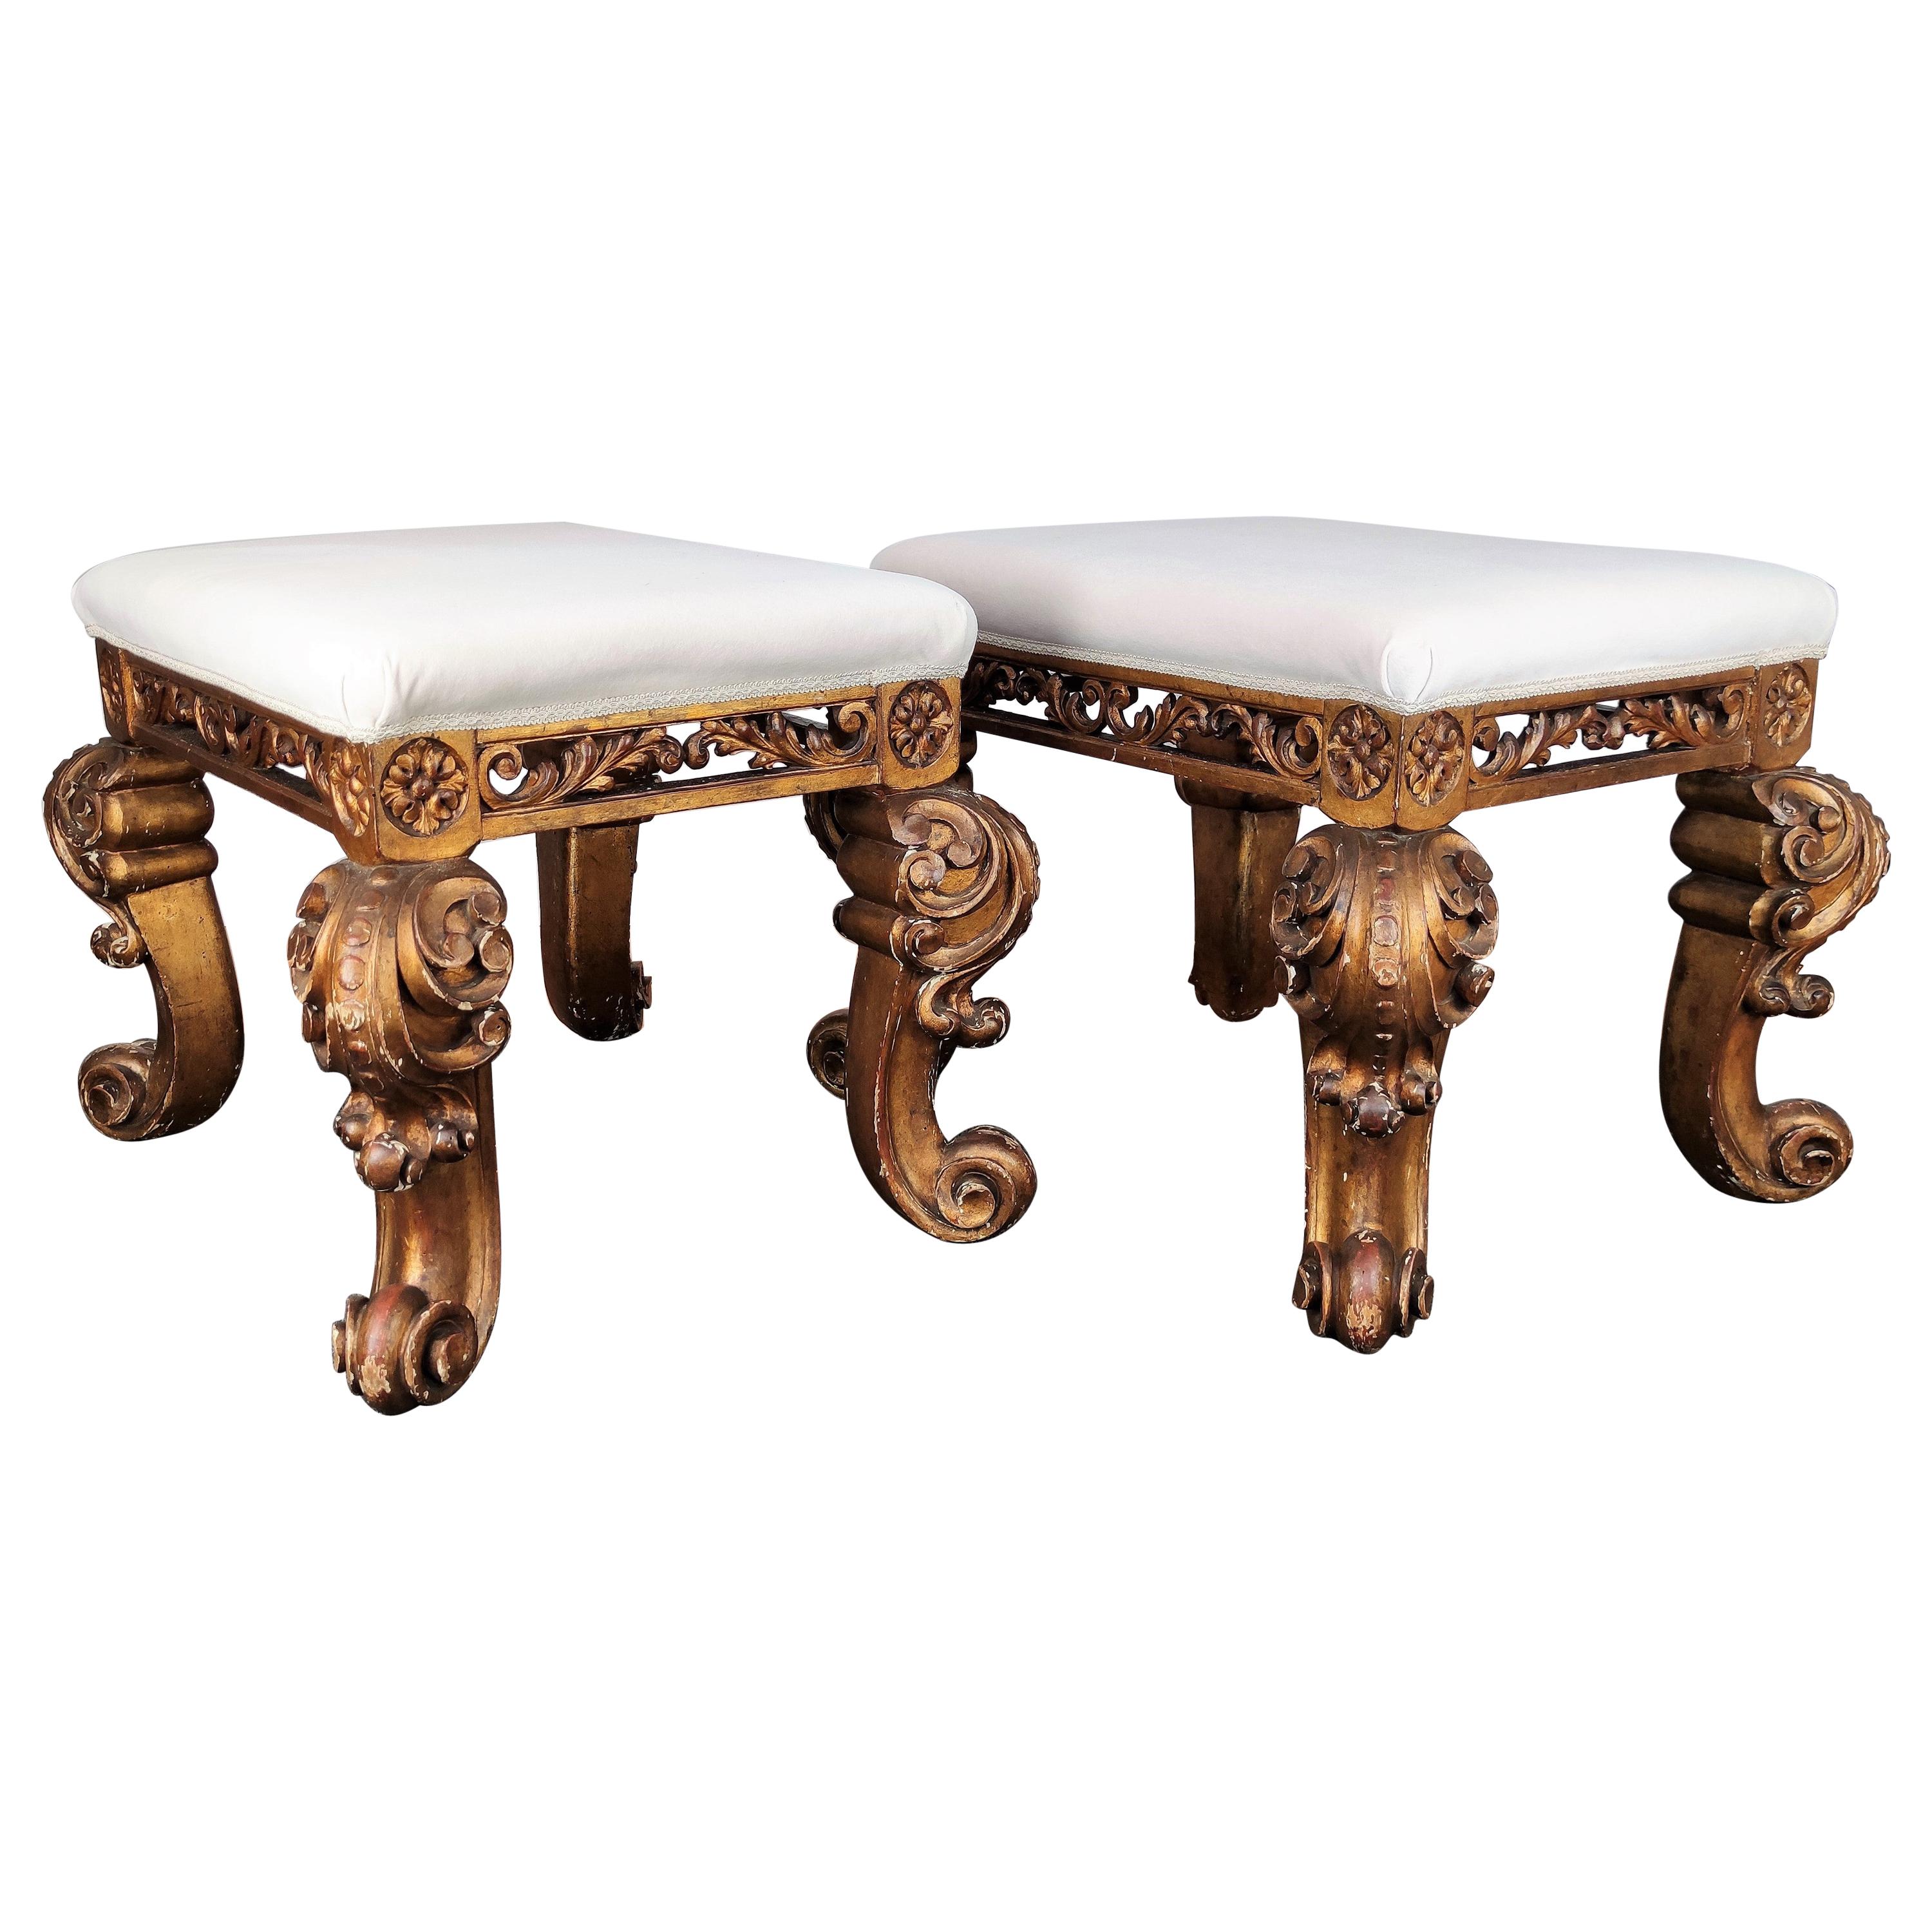 Pair of 17th Century Italian Carved Giltwood Baroque Stools Newly Reupholstered